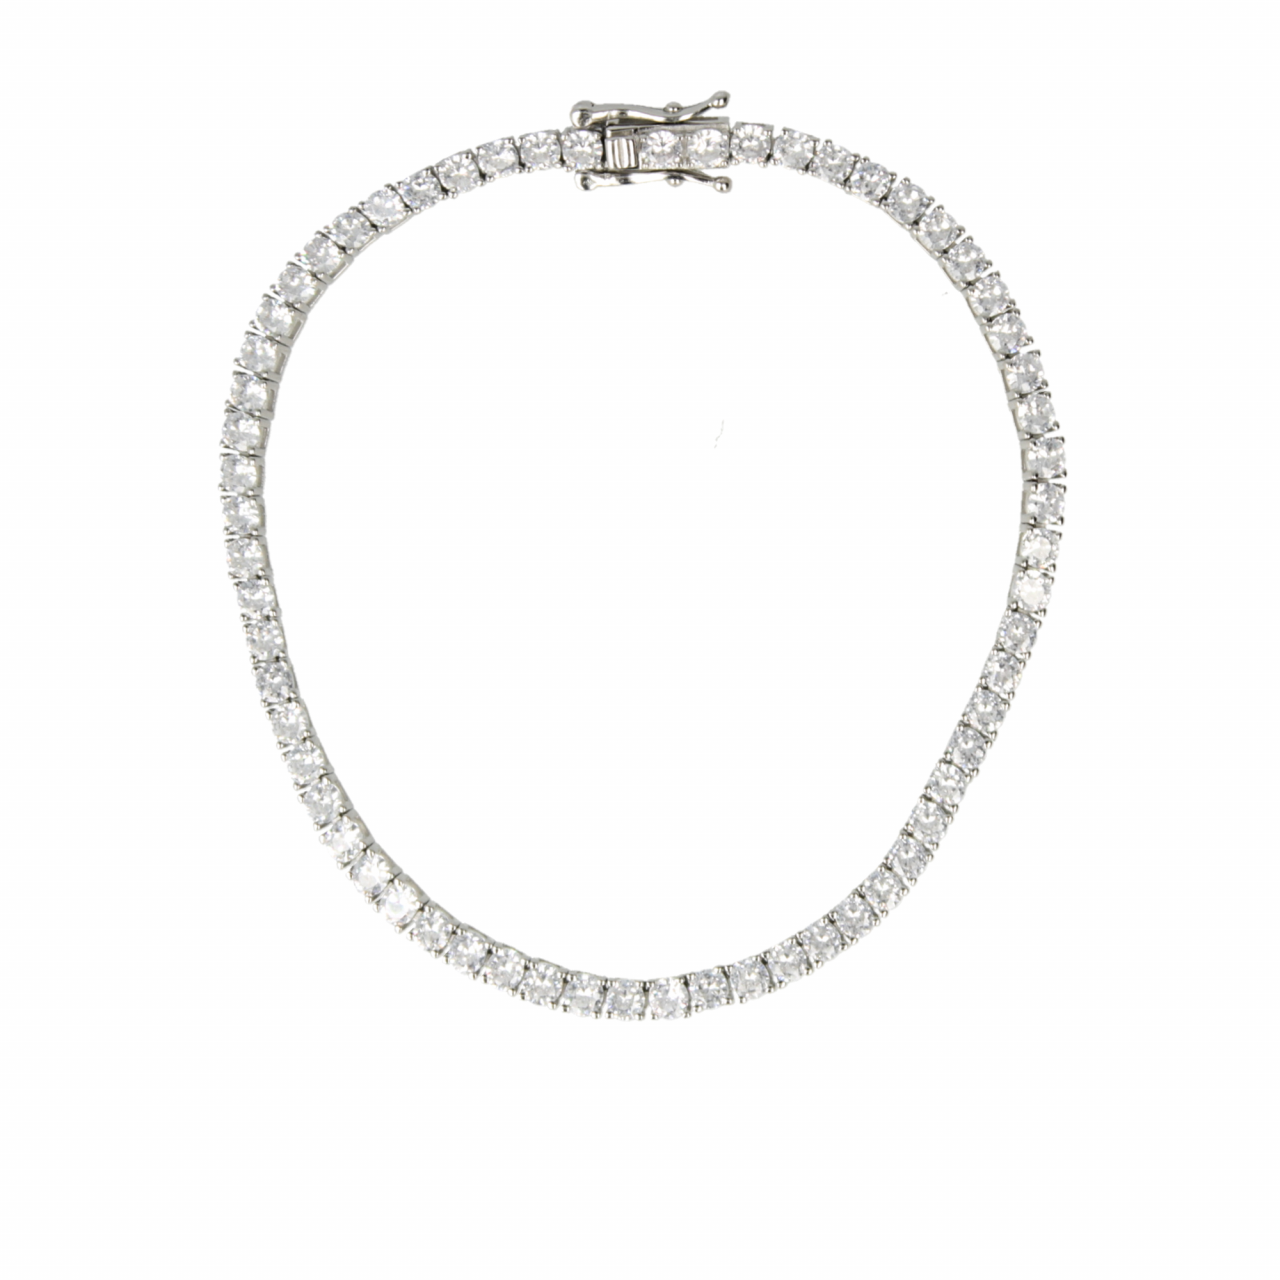 Classic silver tennis M necklace